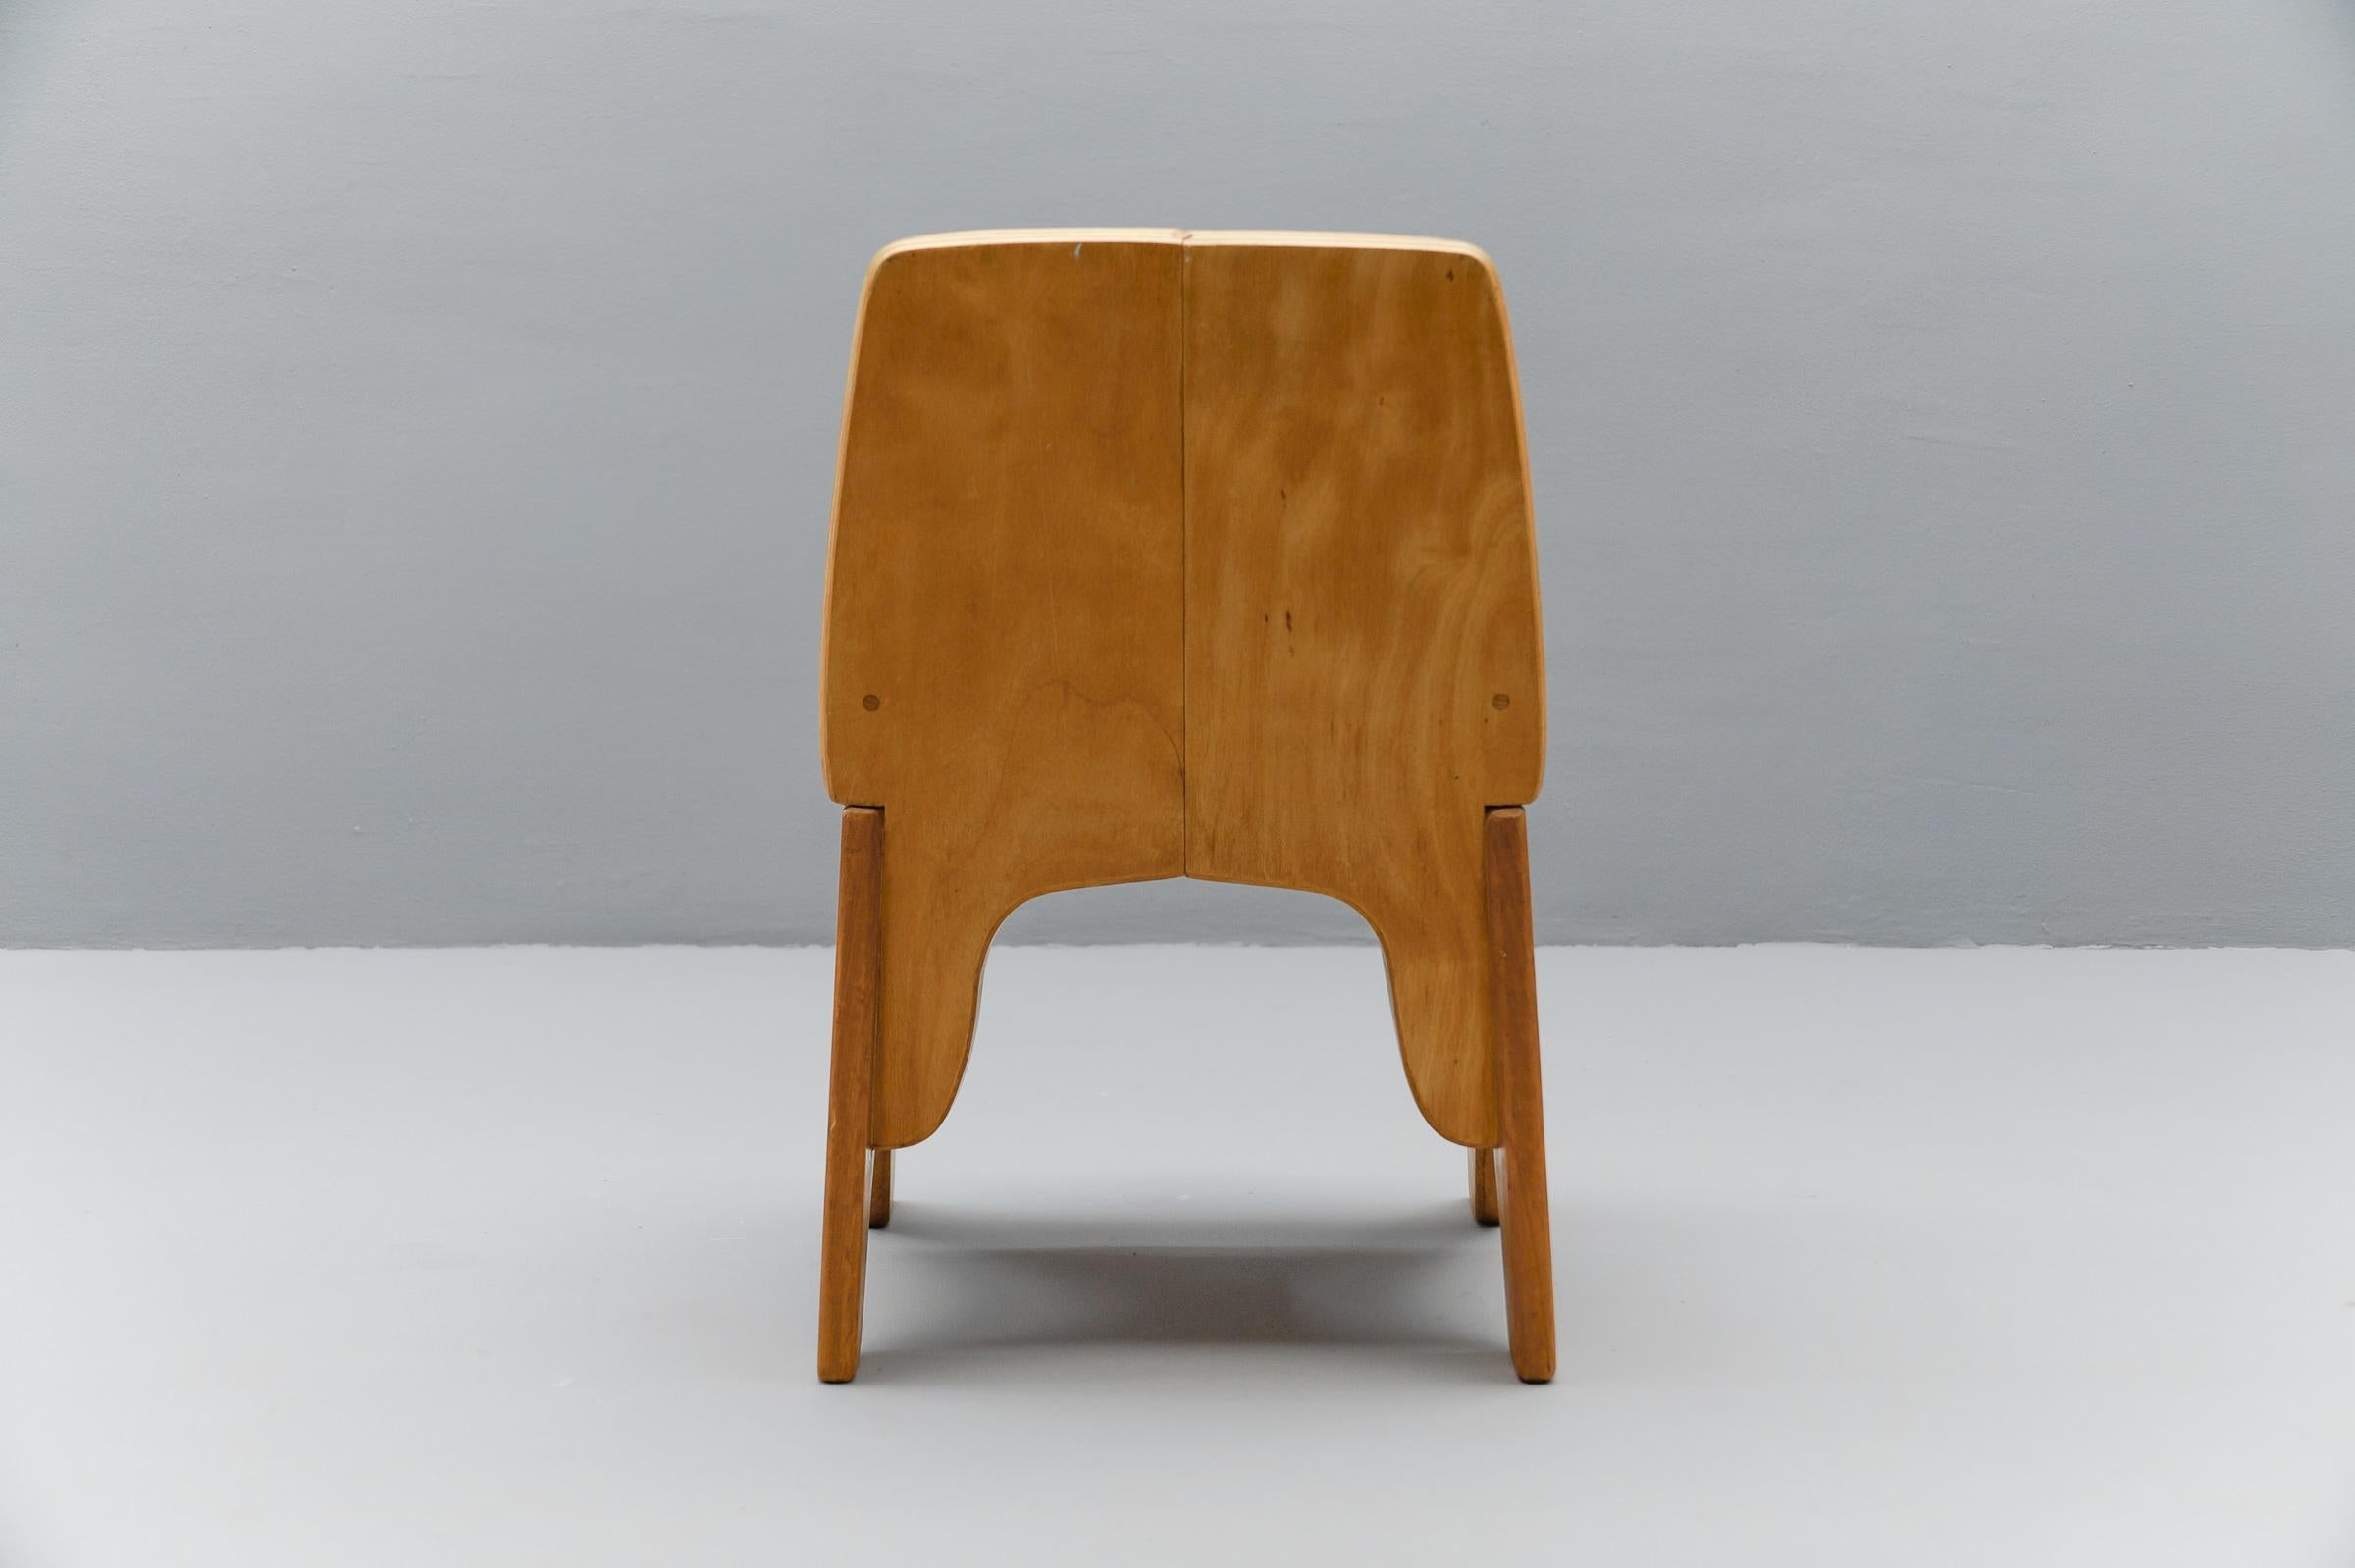 Plywood Awesome and Rare Scandinavian Wooden Childs Chair, 1960s For Sale